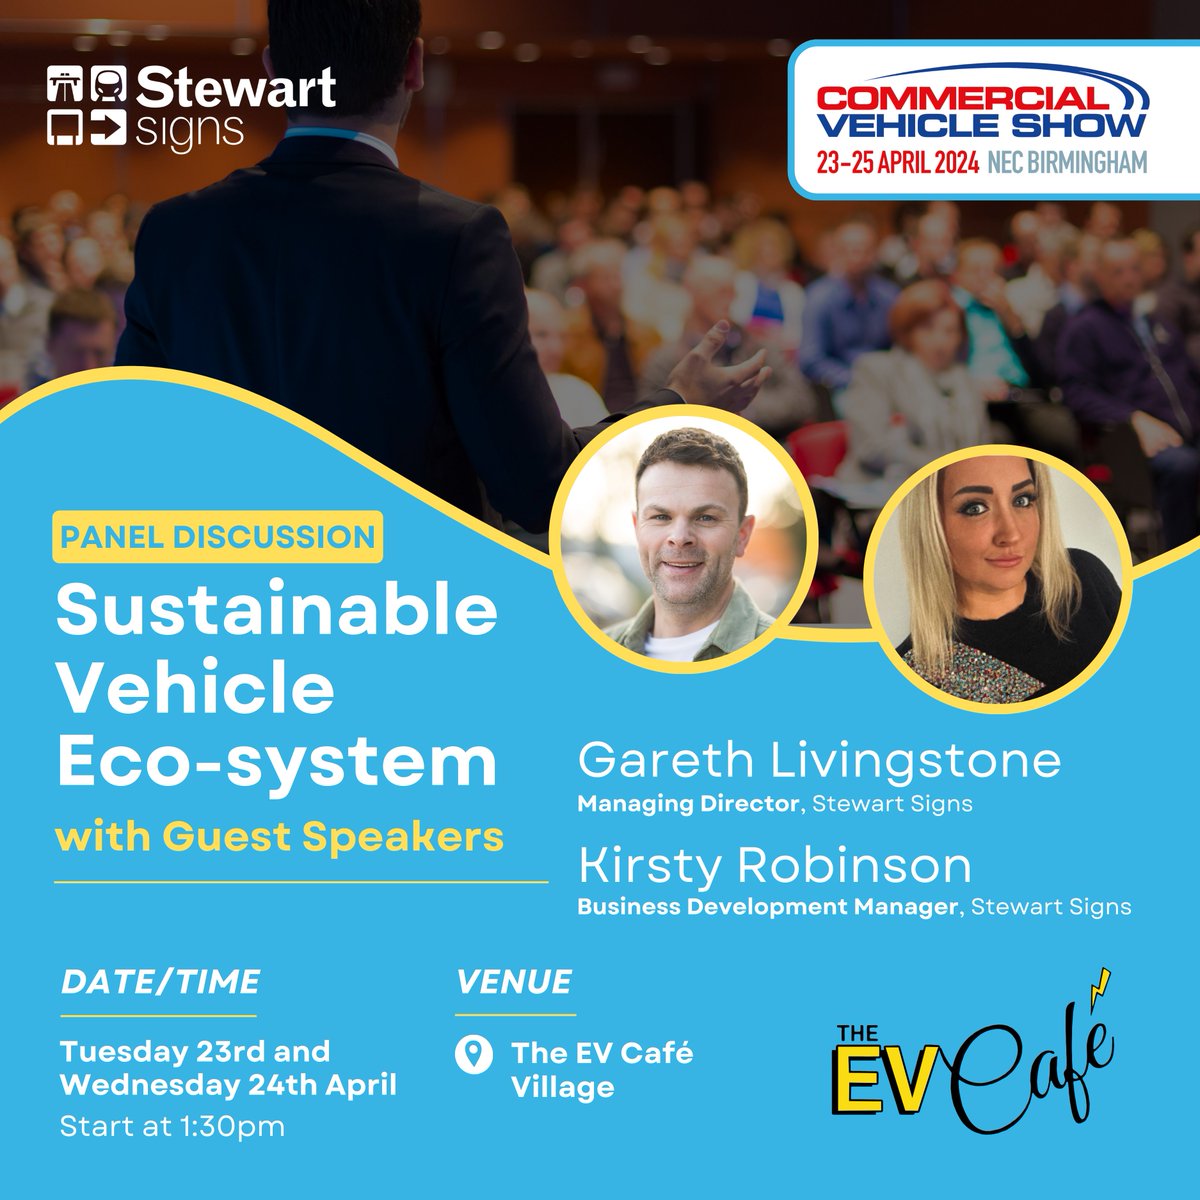 @TheCVShow If you're at the #CVShow today and tomorrow, don't miss our team speaking at The EV Cafe panel!

Today's guest speaker is our Managing Director, Gareth Livingstone.

Tomorrow, hear from our Business Development Manager (Road Fleet), Kirsty Robinson. 

#CVShow2024 #EVCafe